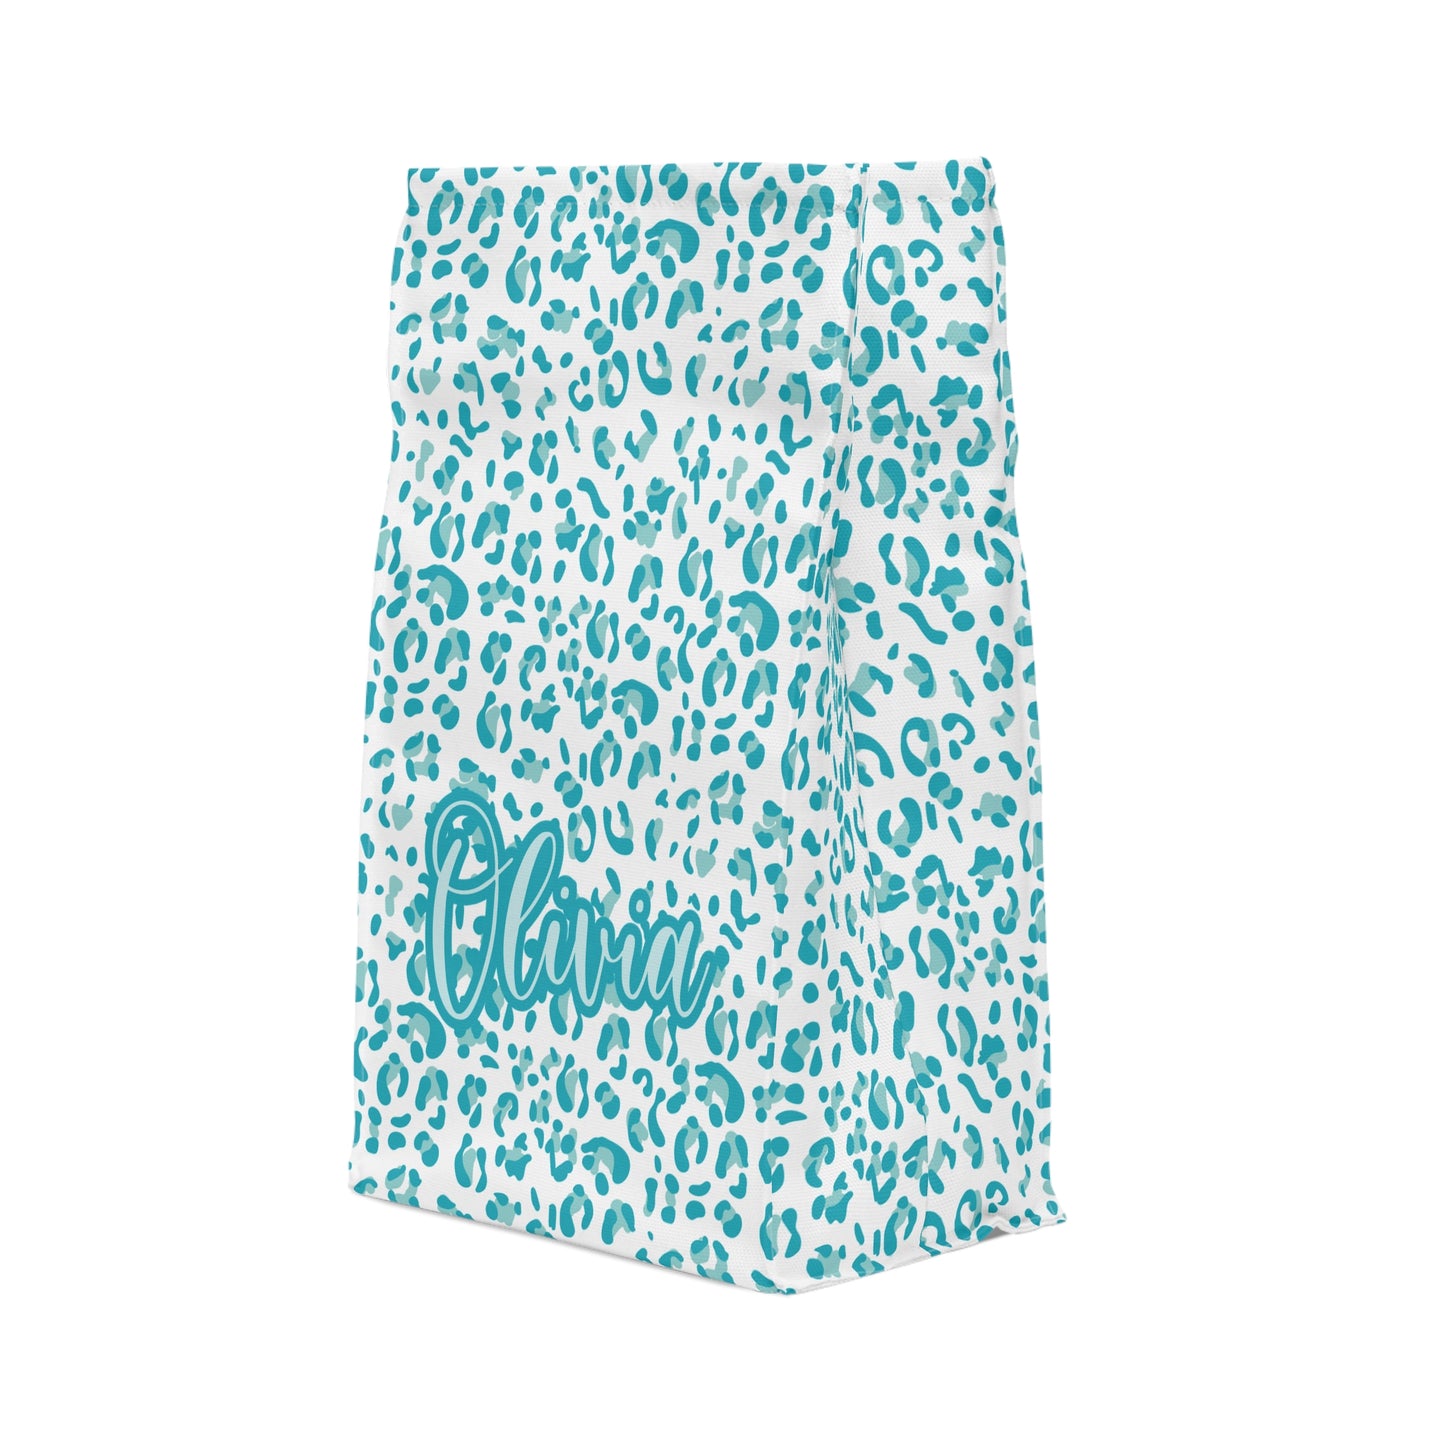 Leopard Print Lunch Bag / Blue Lunch Tote